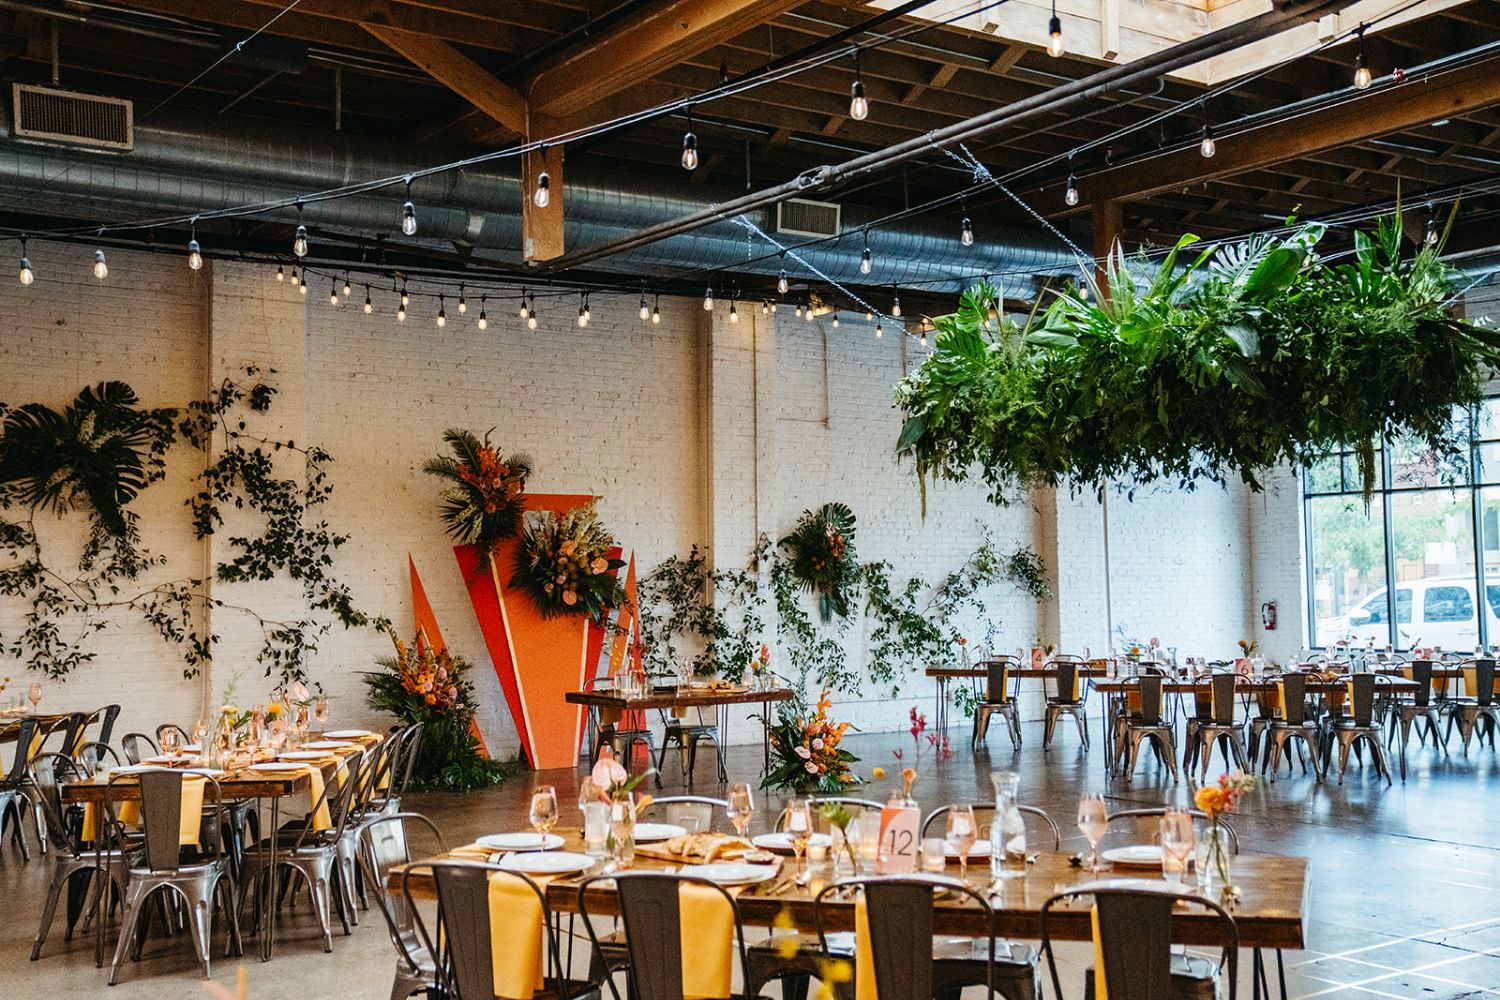 Wedding reception set-up with tables and chairs, greenery chandeliers, and a geometric orange backdrop behind the sweetheart table